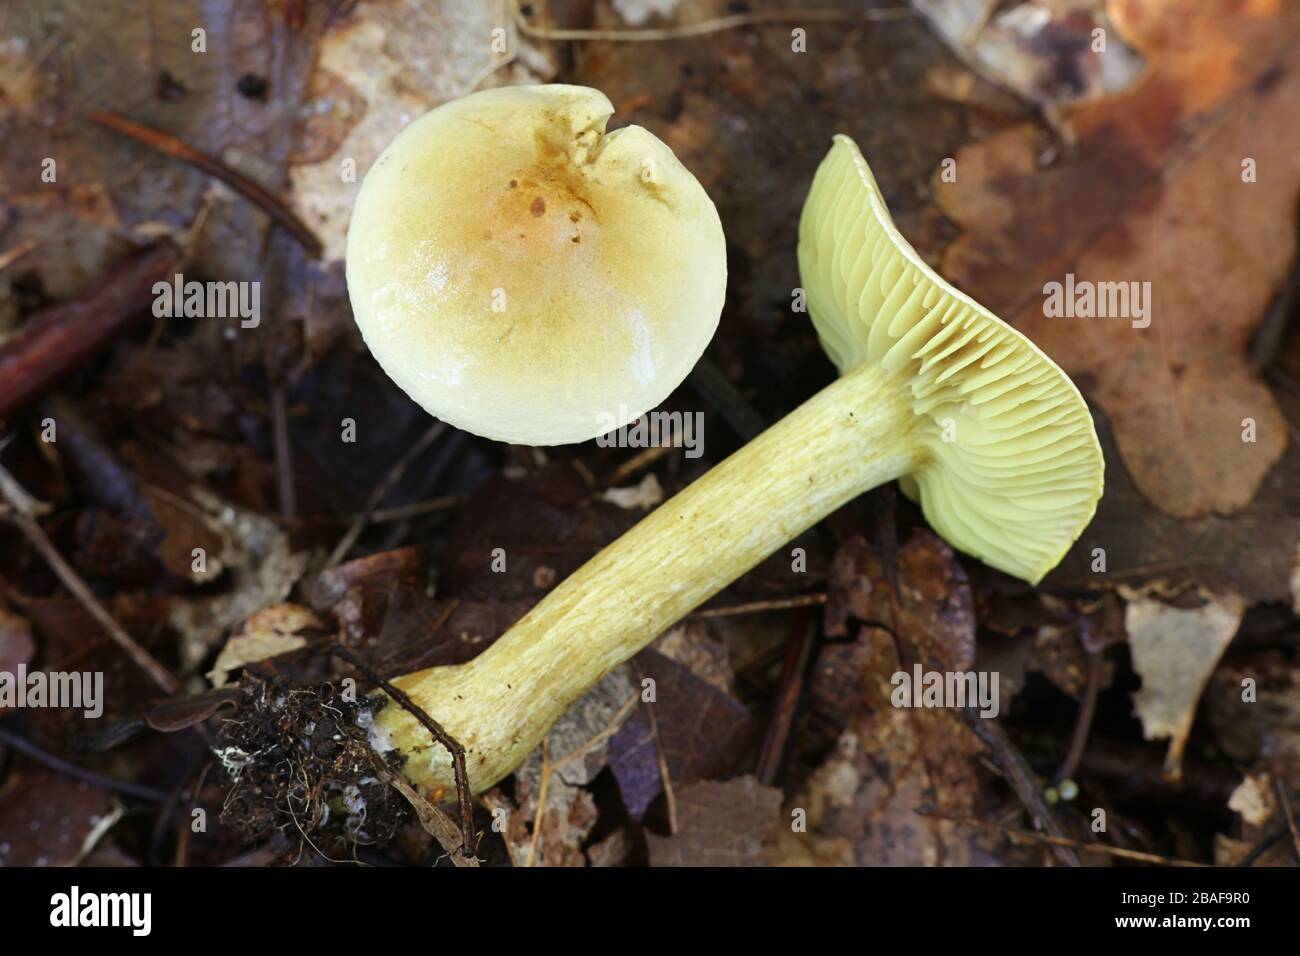 Tricholoma sulphureum, known as sulphur knight or gas agaric, inedible mushroom from Finland Stock Photo